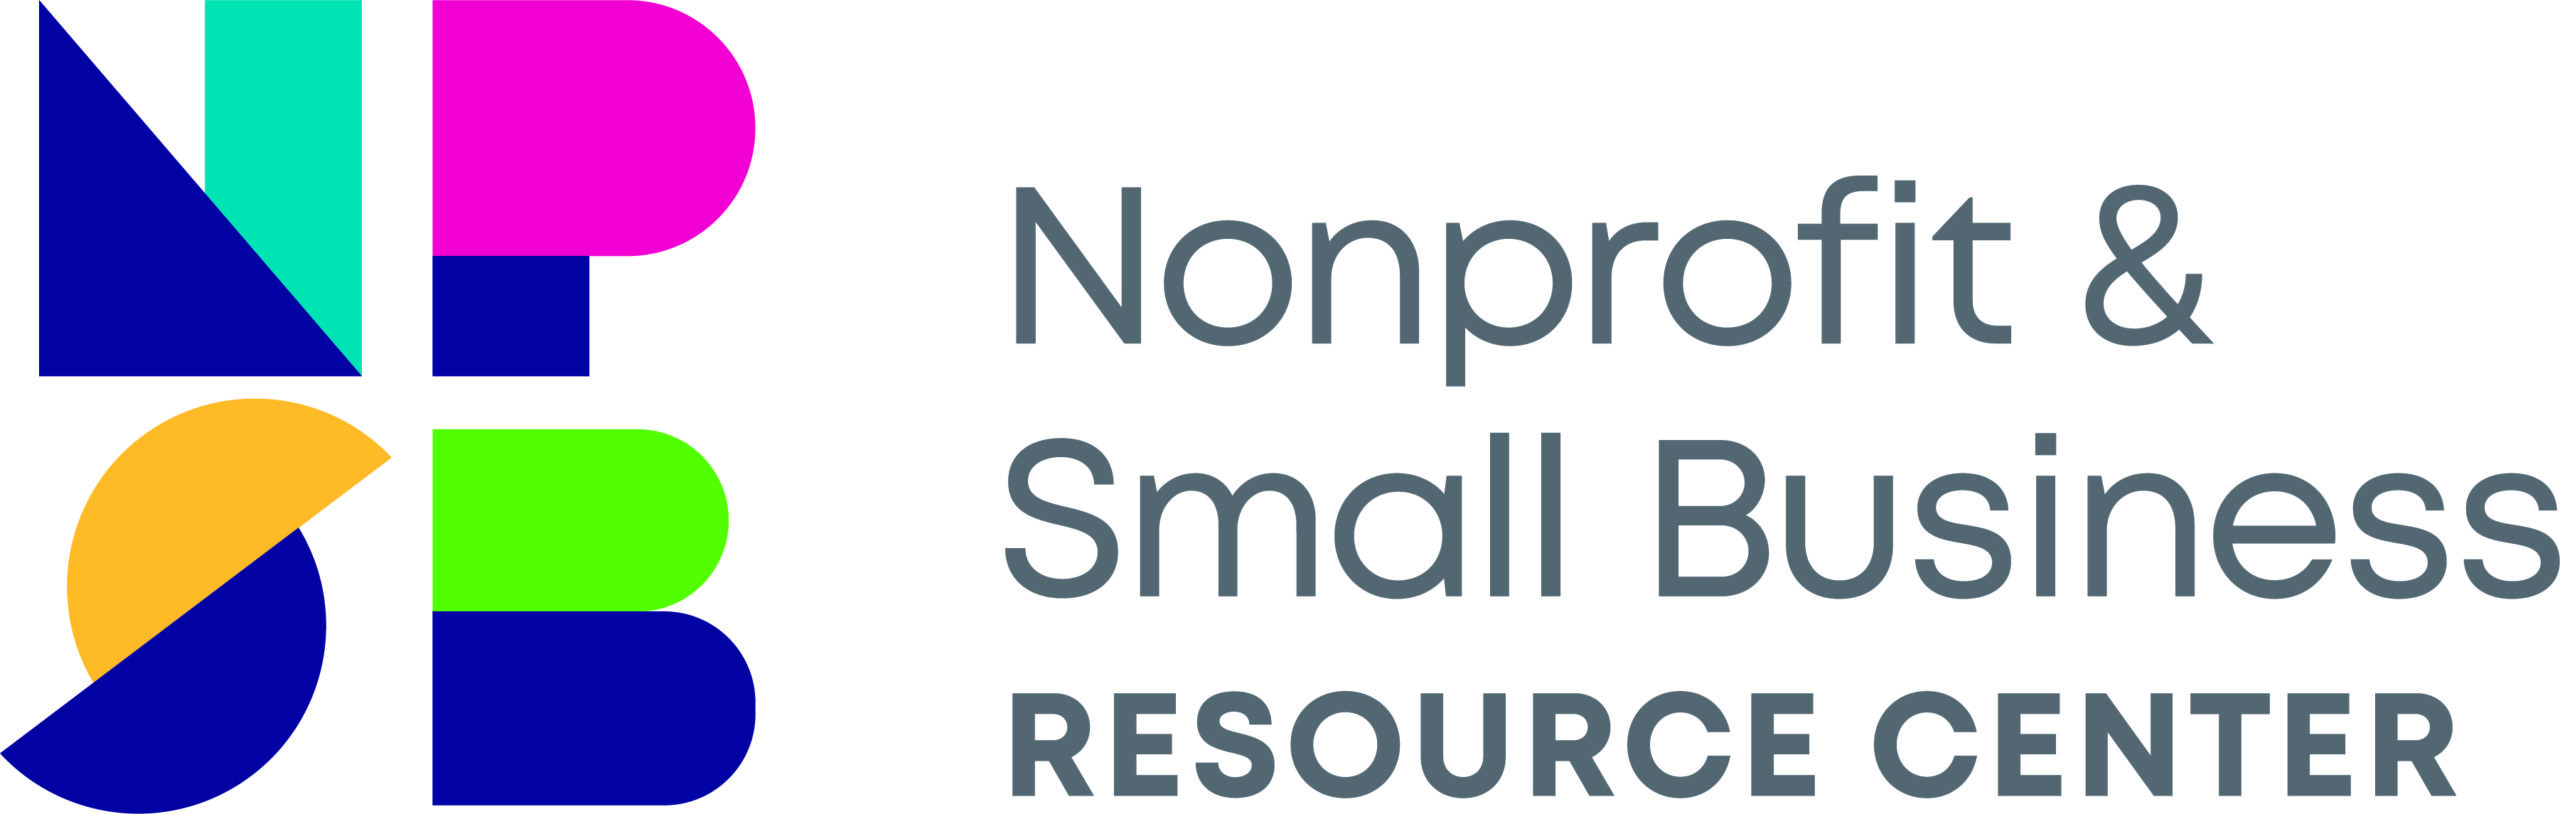 Nonprofit Small Business Resource Center